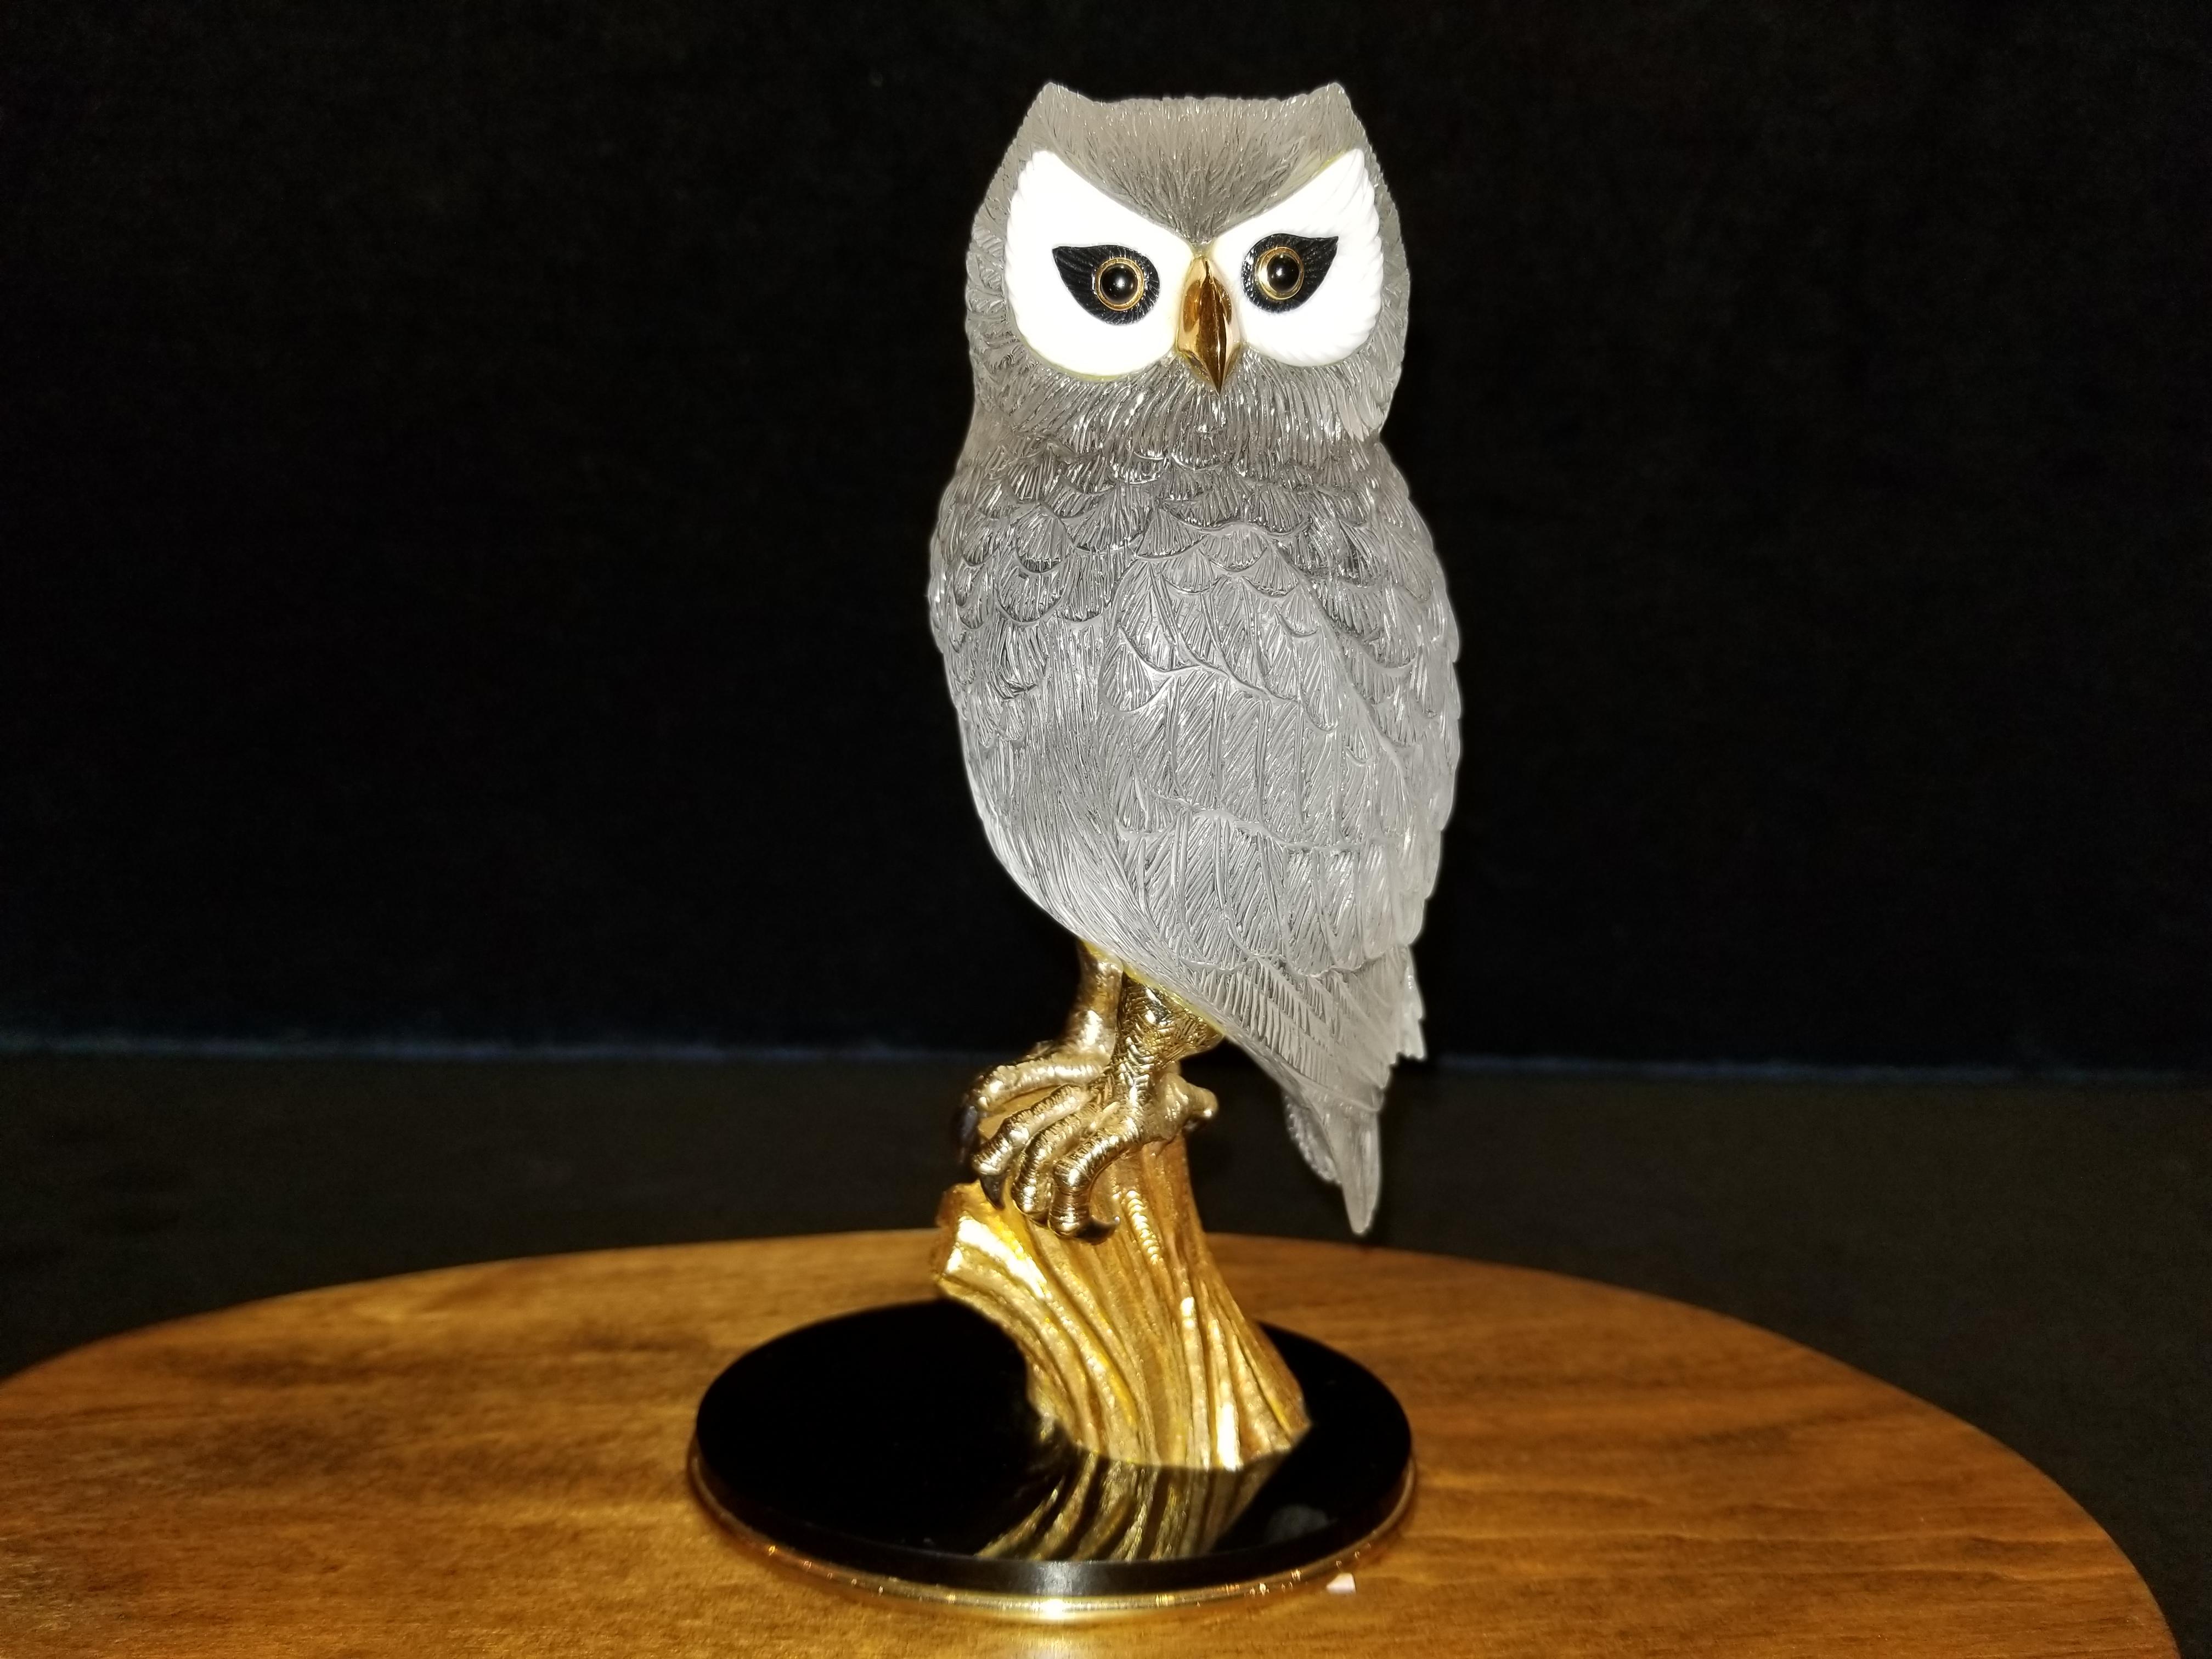 This fine hand carved rock crystal owl statue by Boucheron France is depicted by inset white and black onyx eyes with a gold beak. Gold feet with carved tigers eye talons. This magnificent Owl rests on a solid 18k gold tree trunk mounted to a black